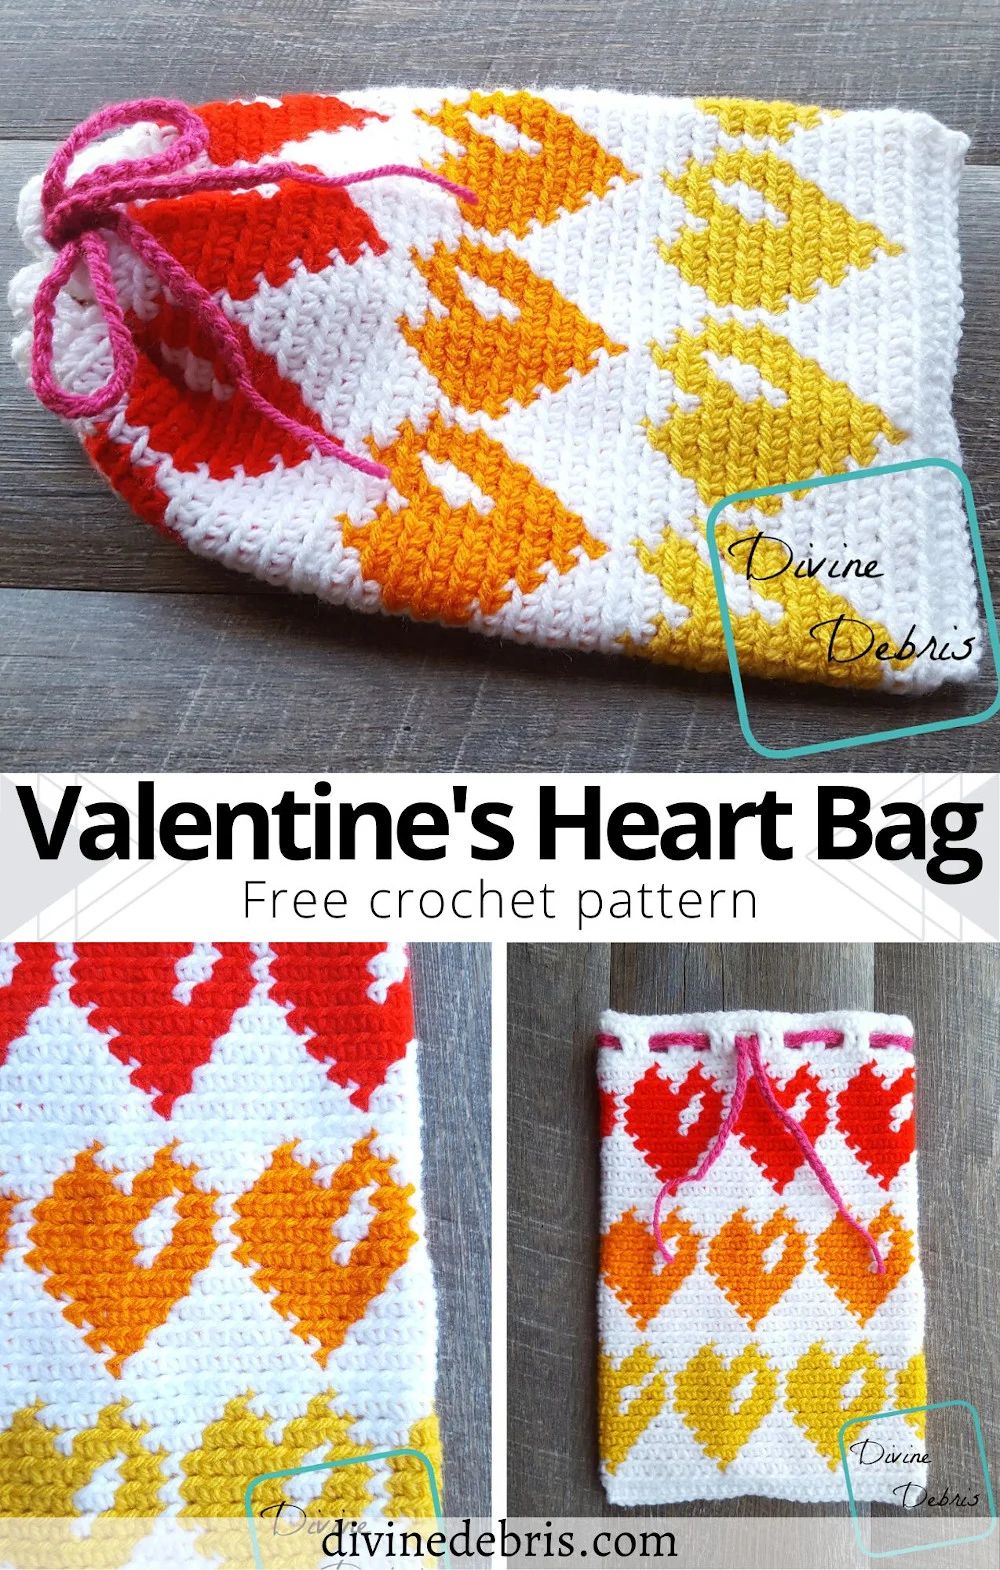 Make a perfect bag to store all the sweet treats and mementos you get with this Valentine's Heart Bag free crochet pattern by DivineDebris.com